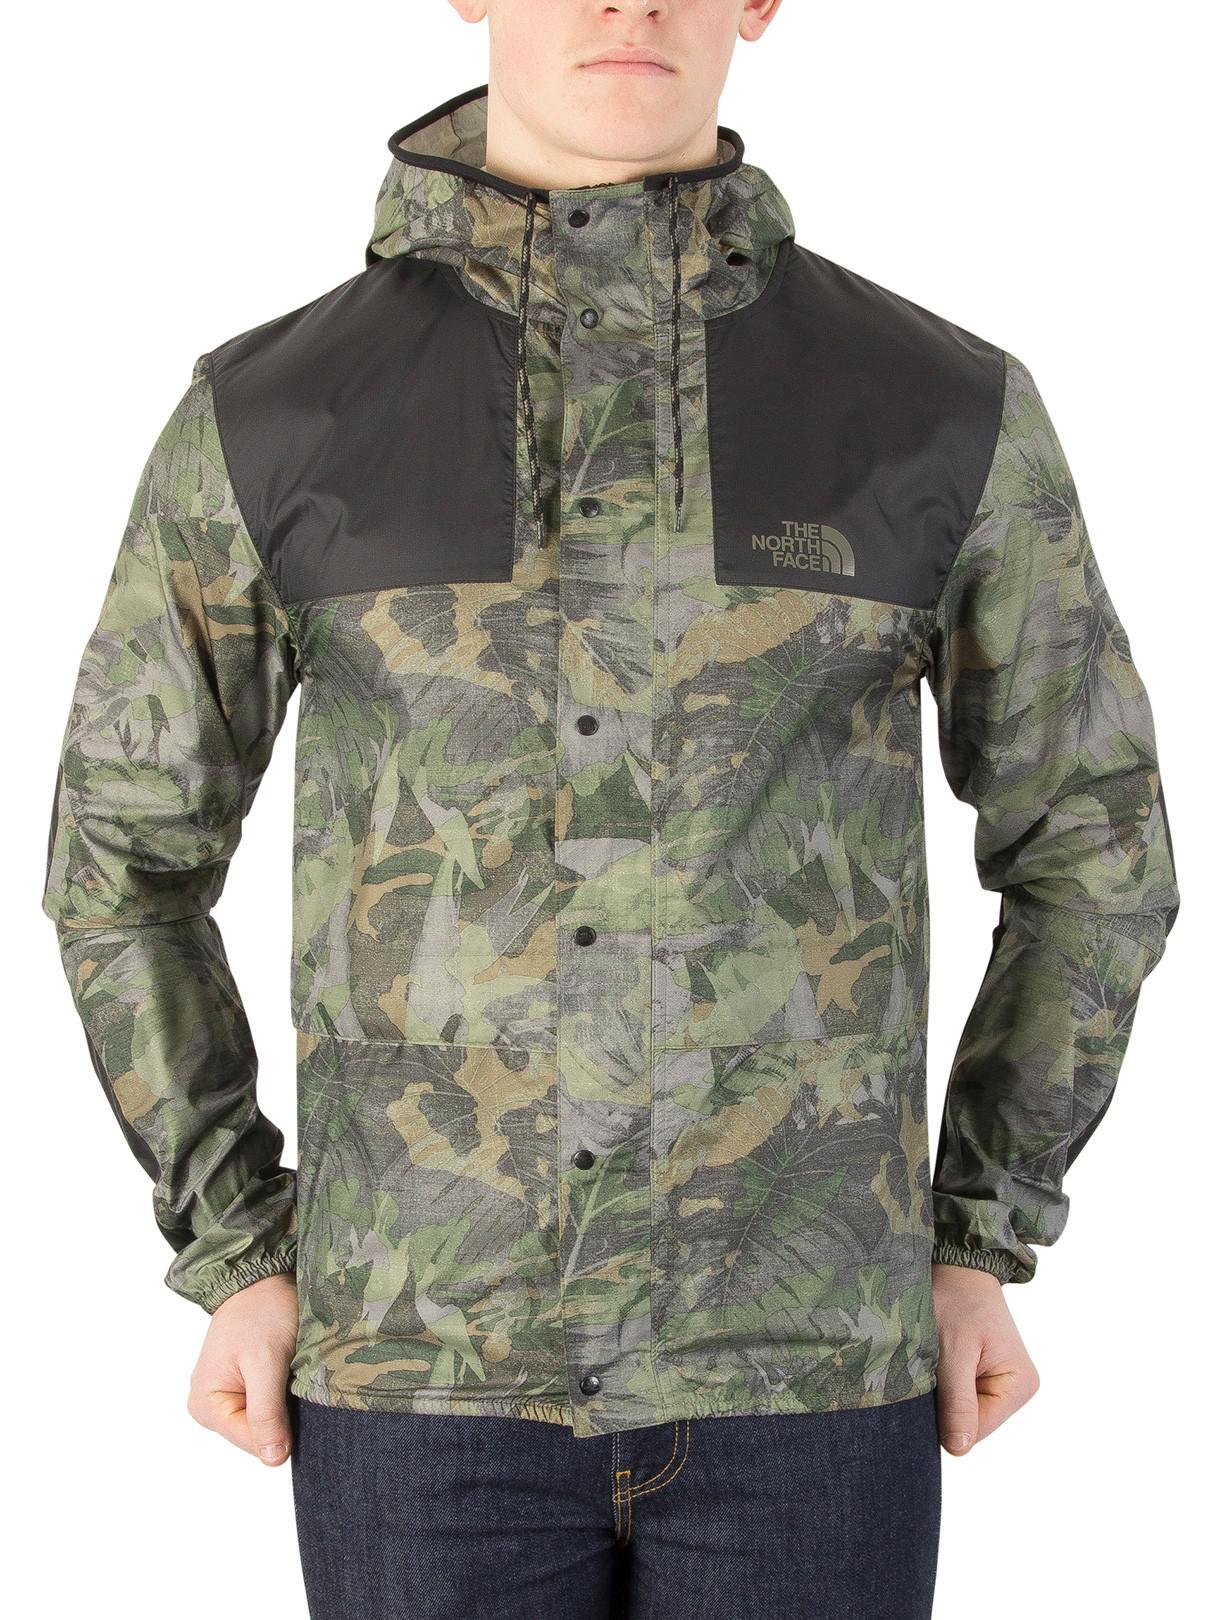 The North Face Synthetic English Green Camo 1985 Mountain Jacket for Men -  Lyst